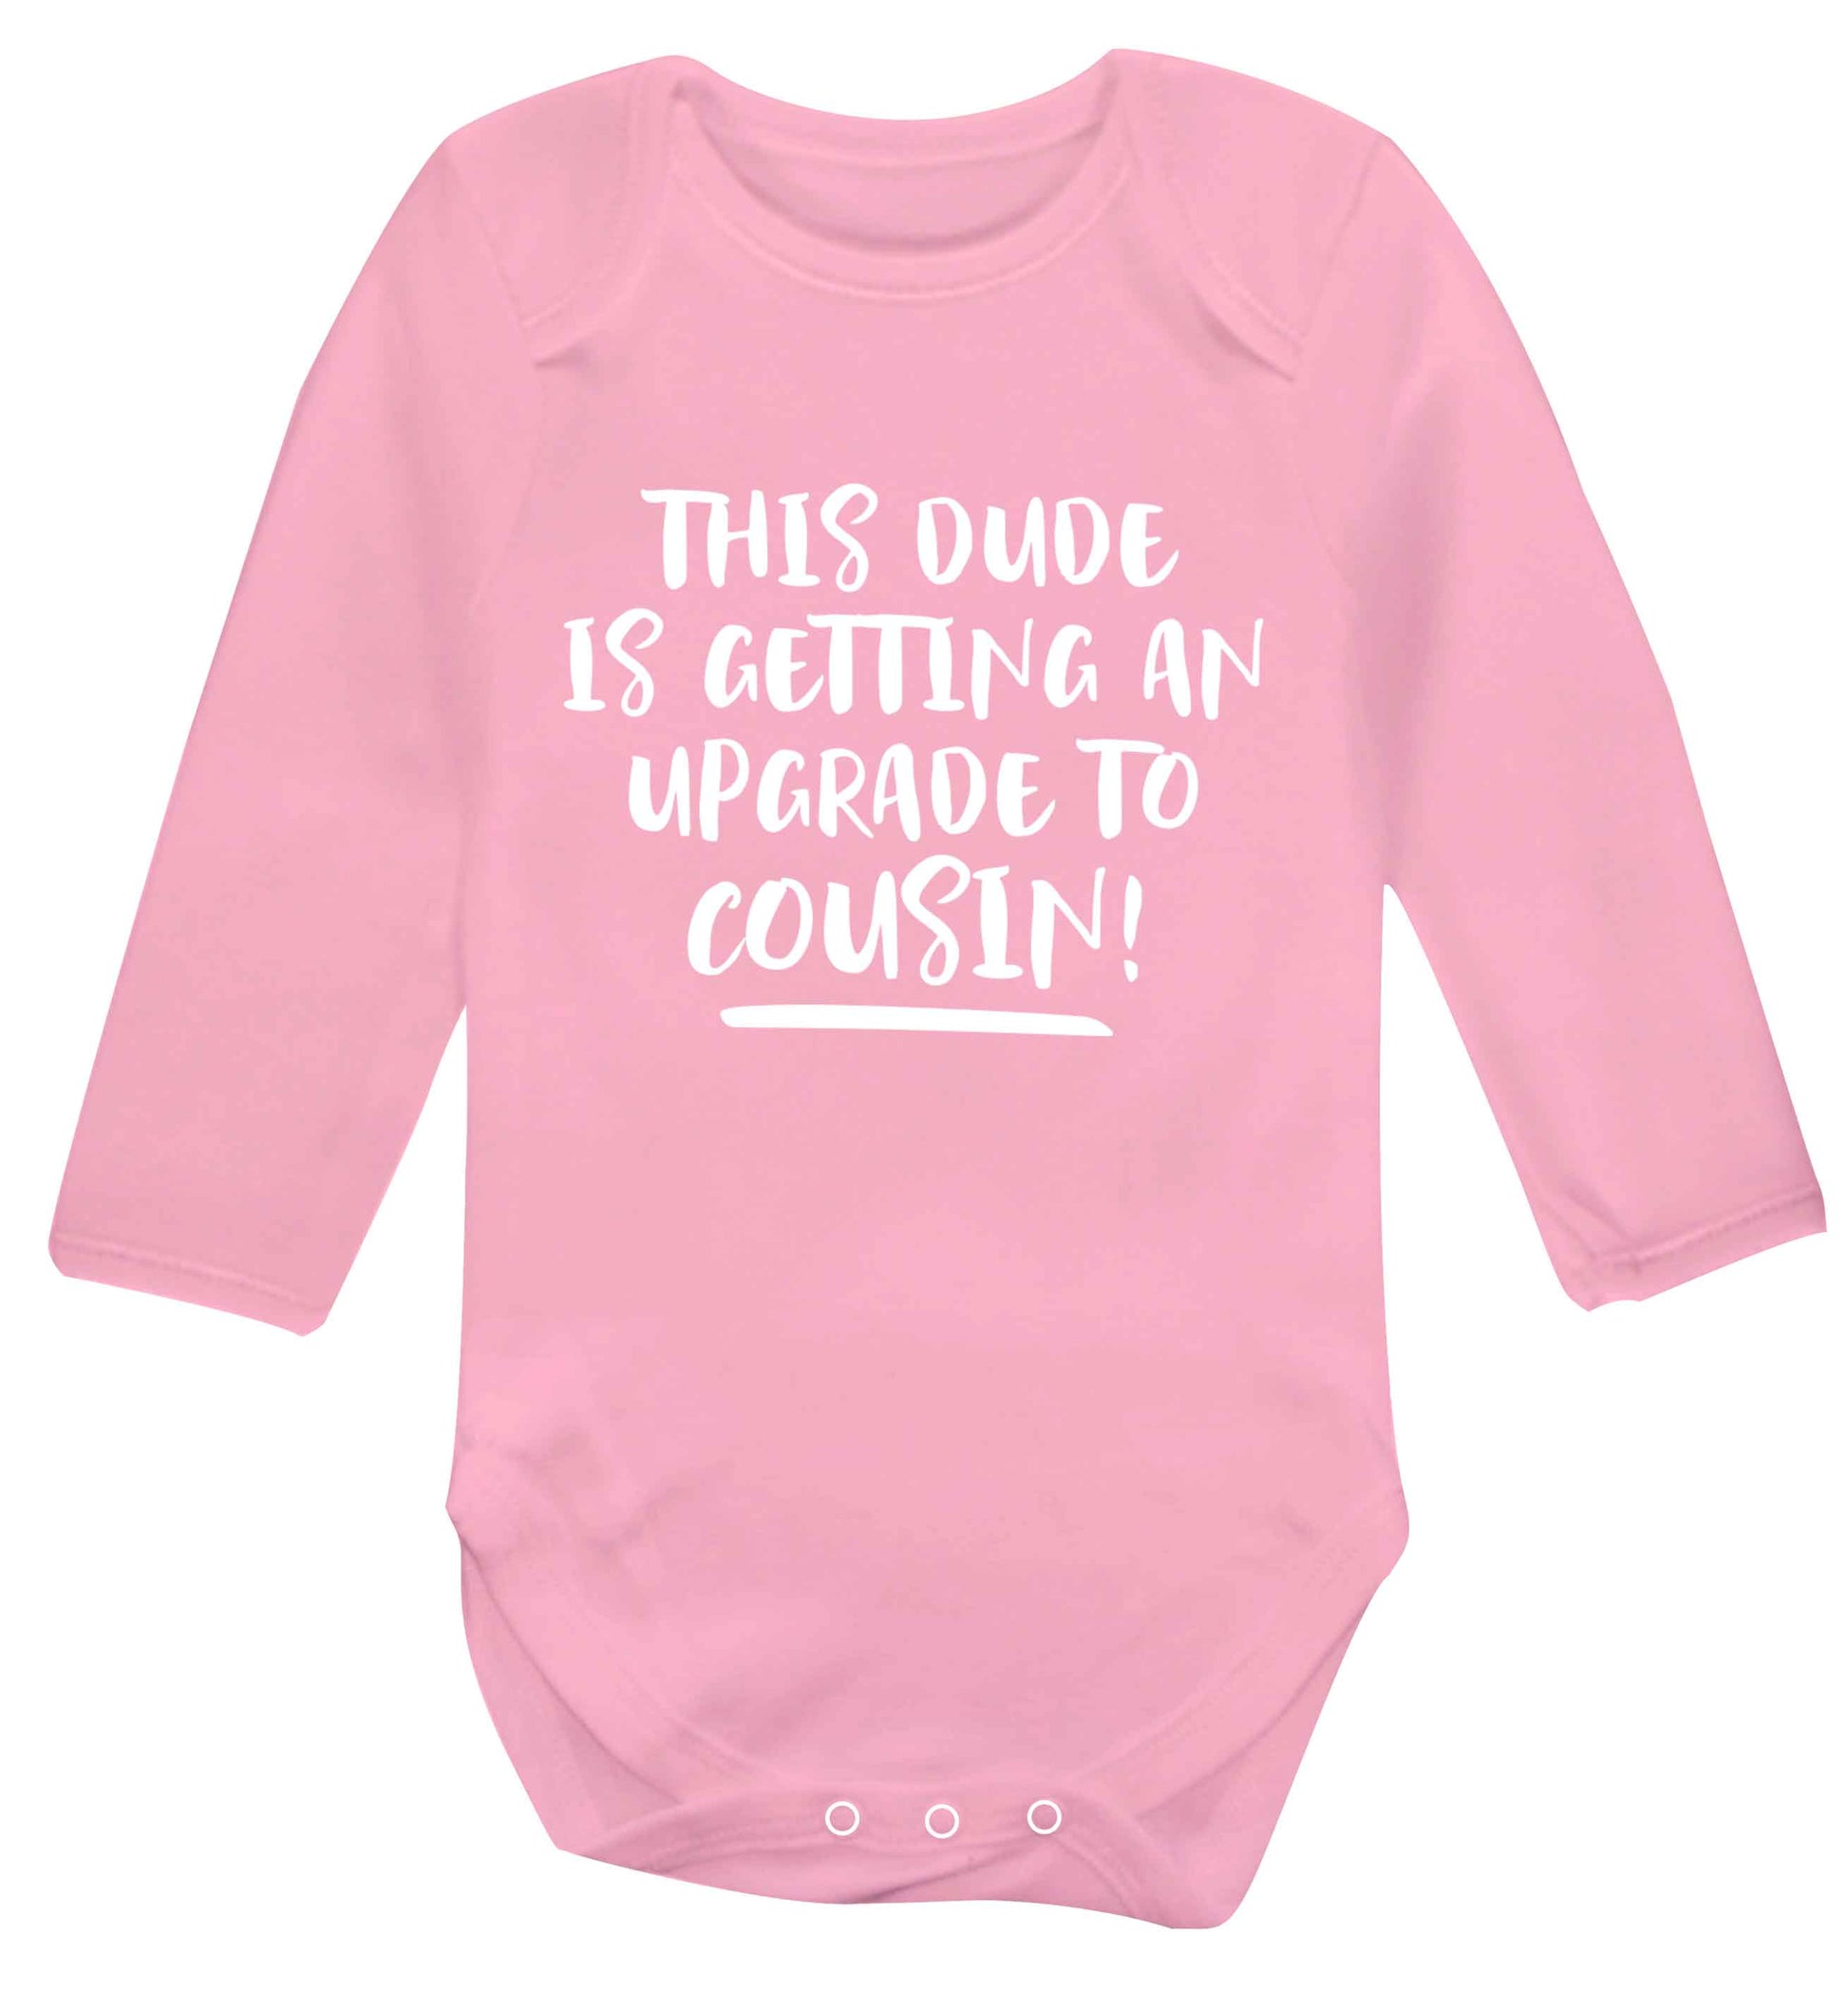 This dude is getting an upgrade to cousin! Baby Vest long sleeved pale pink 6-12 months